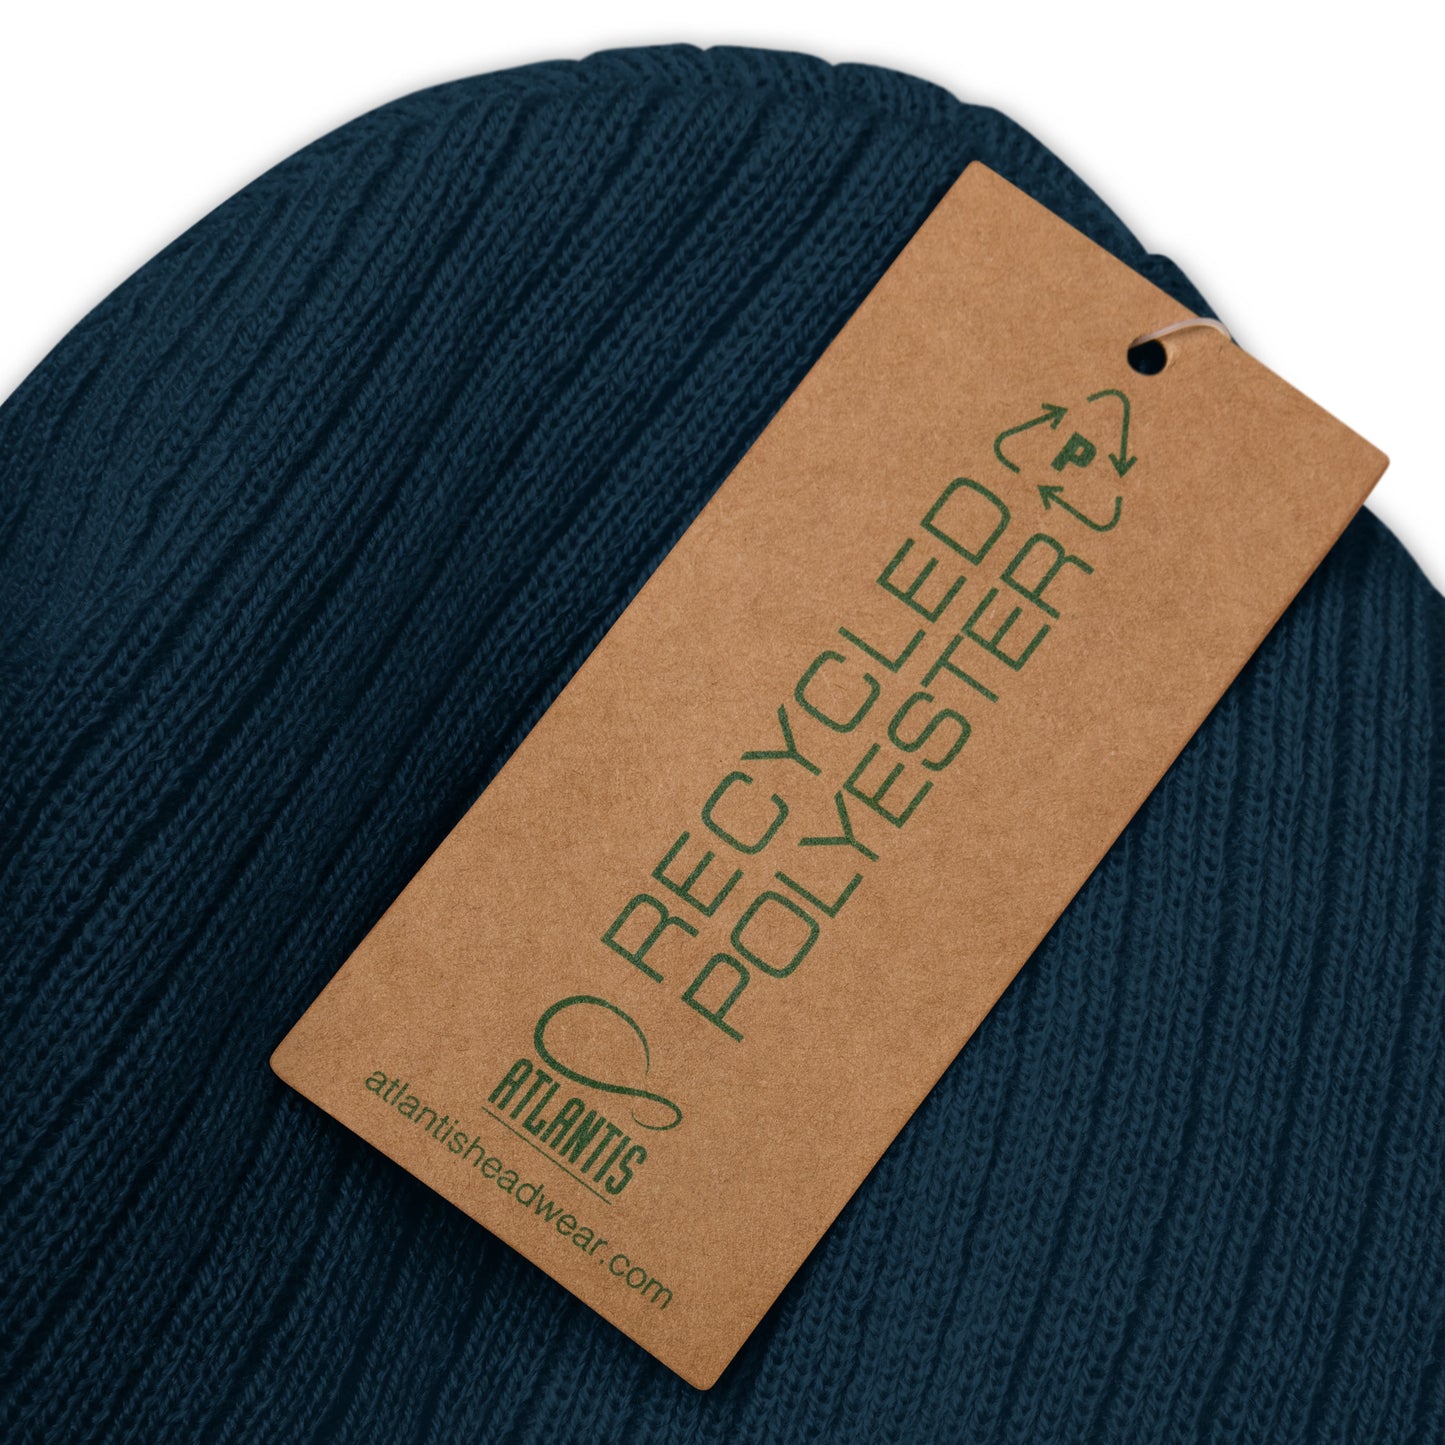 ANGELCOR ARMY Ribbed knit beanie